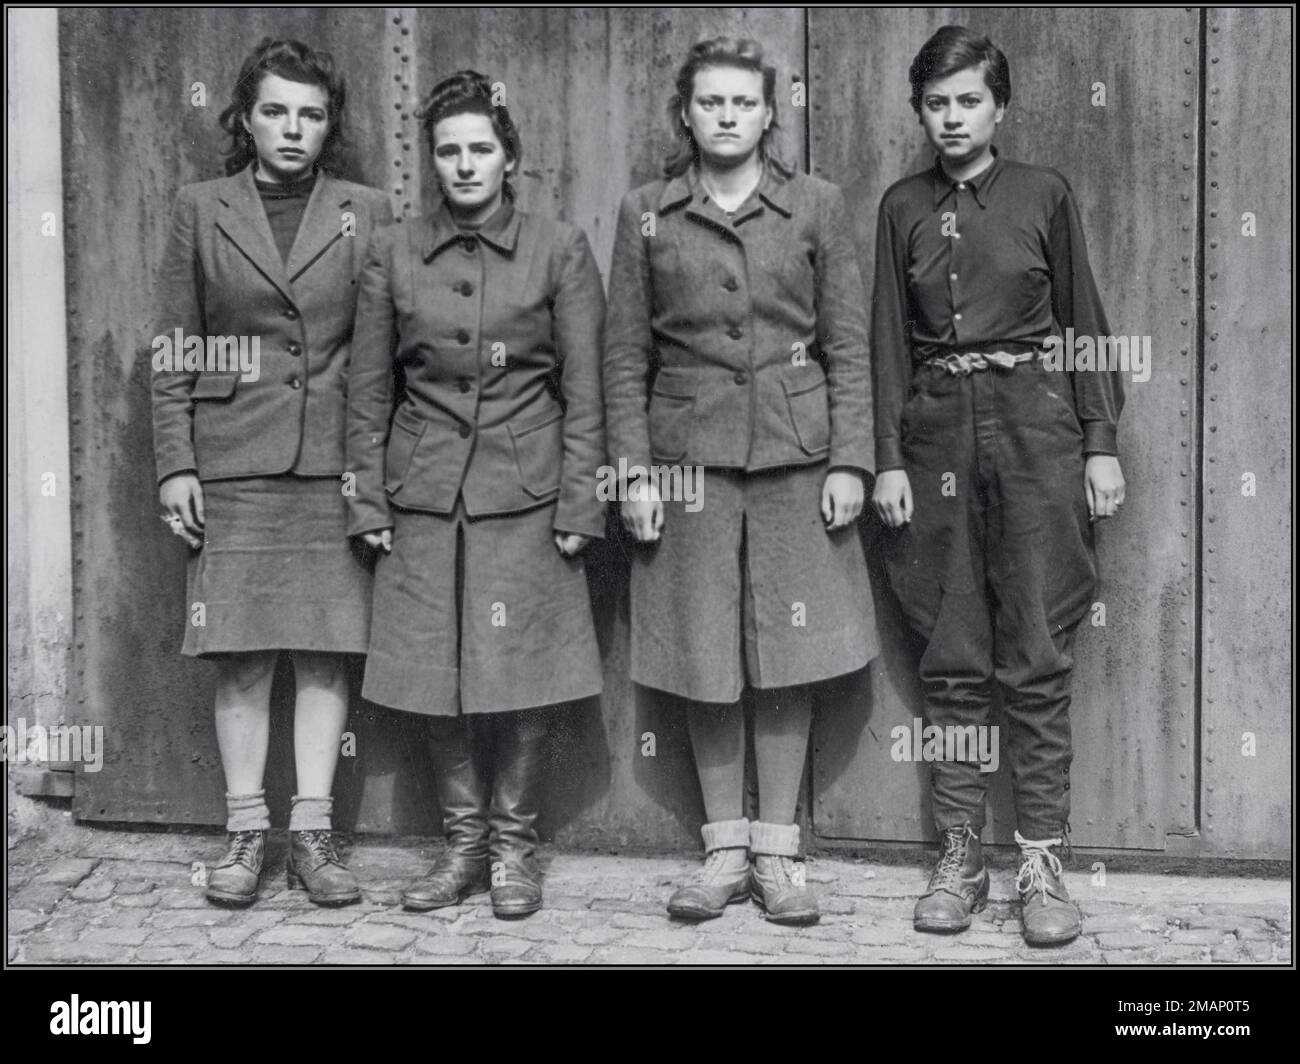 BELSEN FEMALE GUARDS Marta Löbelt telephone operator, Gertrud Rheinhold, Irene Haschke and Anneliese Kohlmann shortly after their arrest at Bergen Belsen, 02 May 1945. The first three are wearing their Nazi uniform while Kohlmann is wearing poorly fitted men's uniform because when arrested she was wearing prisoner uniform trying to disguise herself as a Jewish woman. Date 2 May 1945 Stock Photo